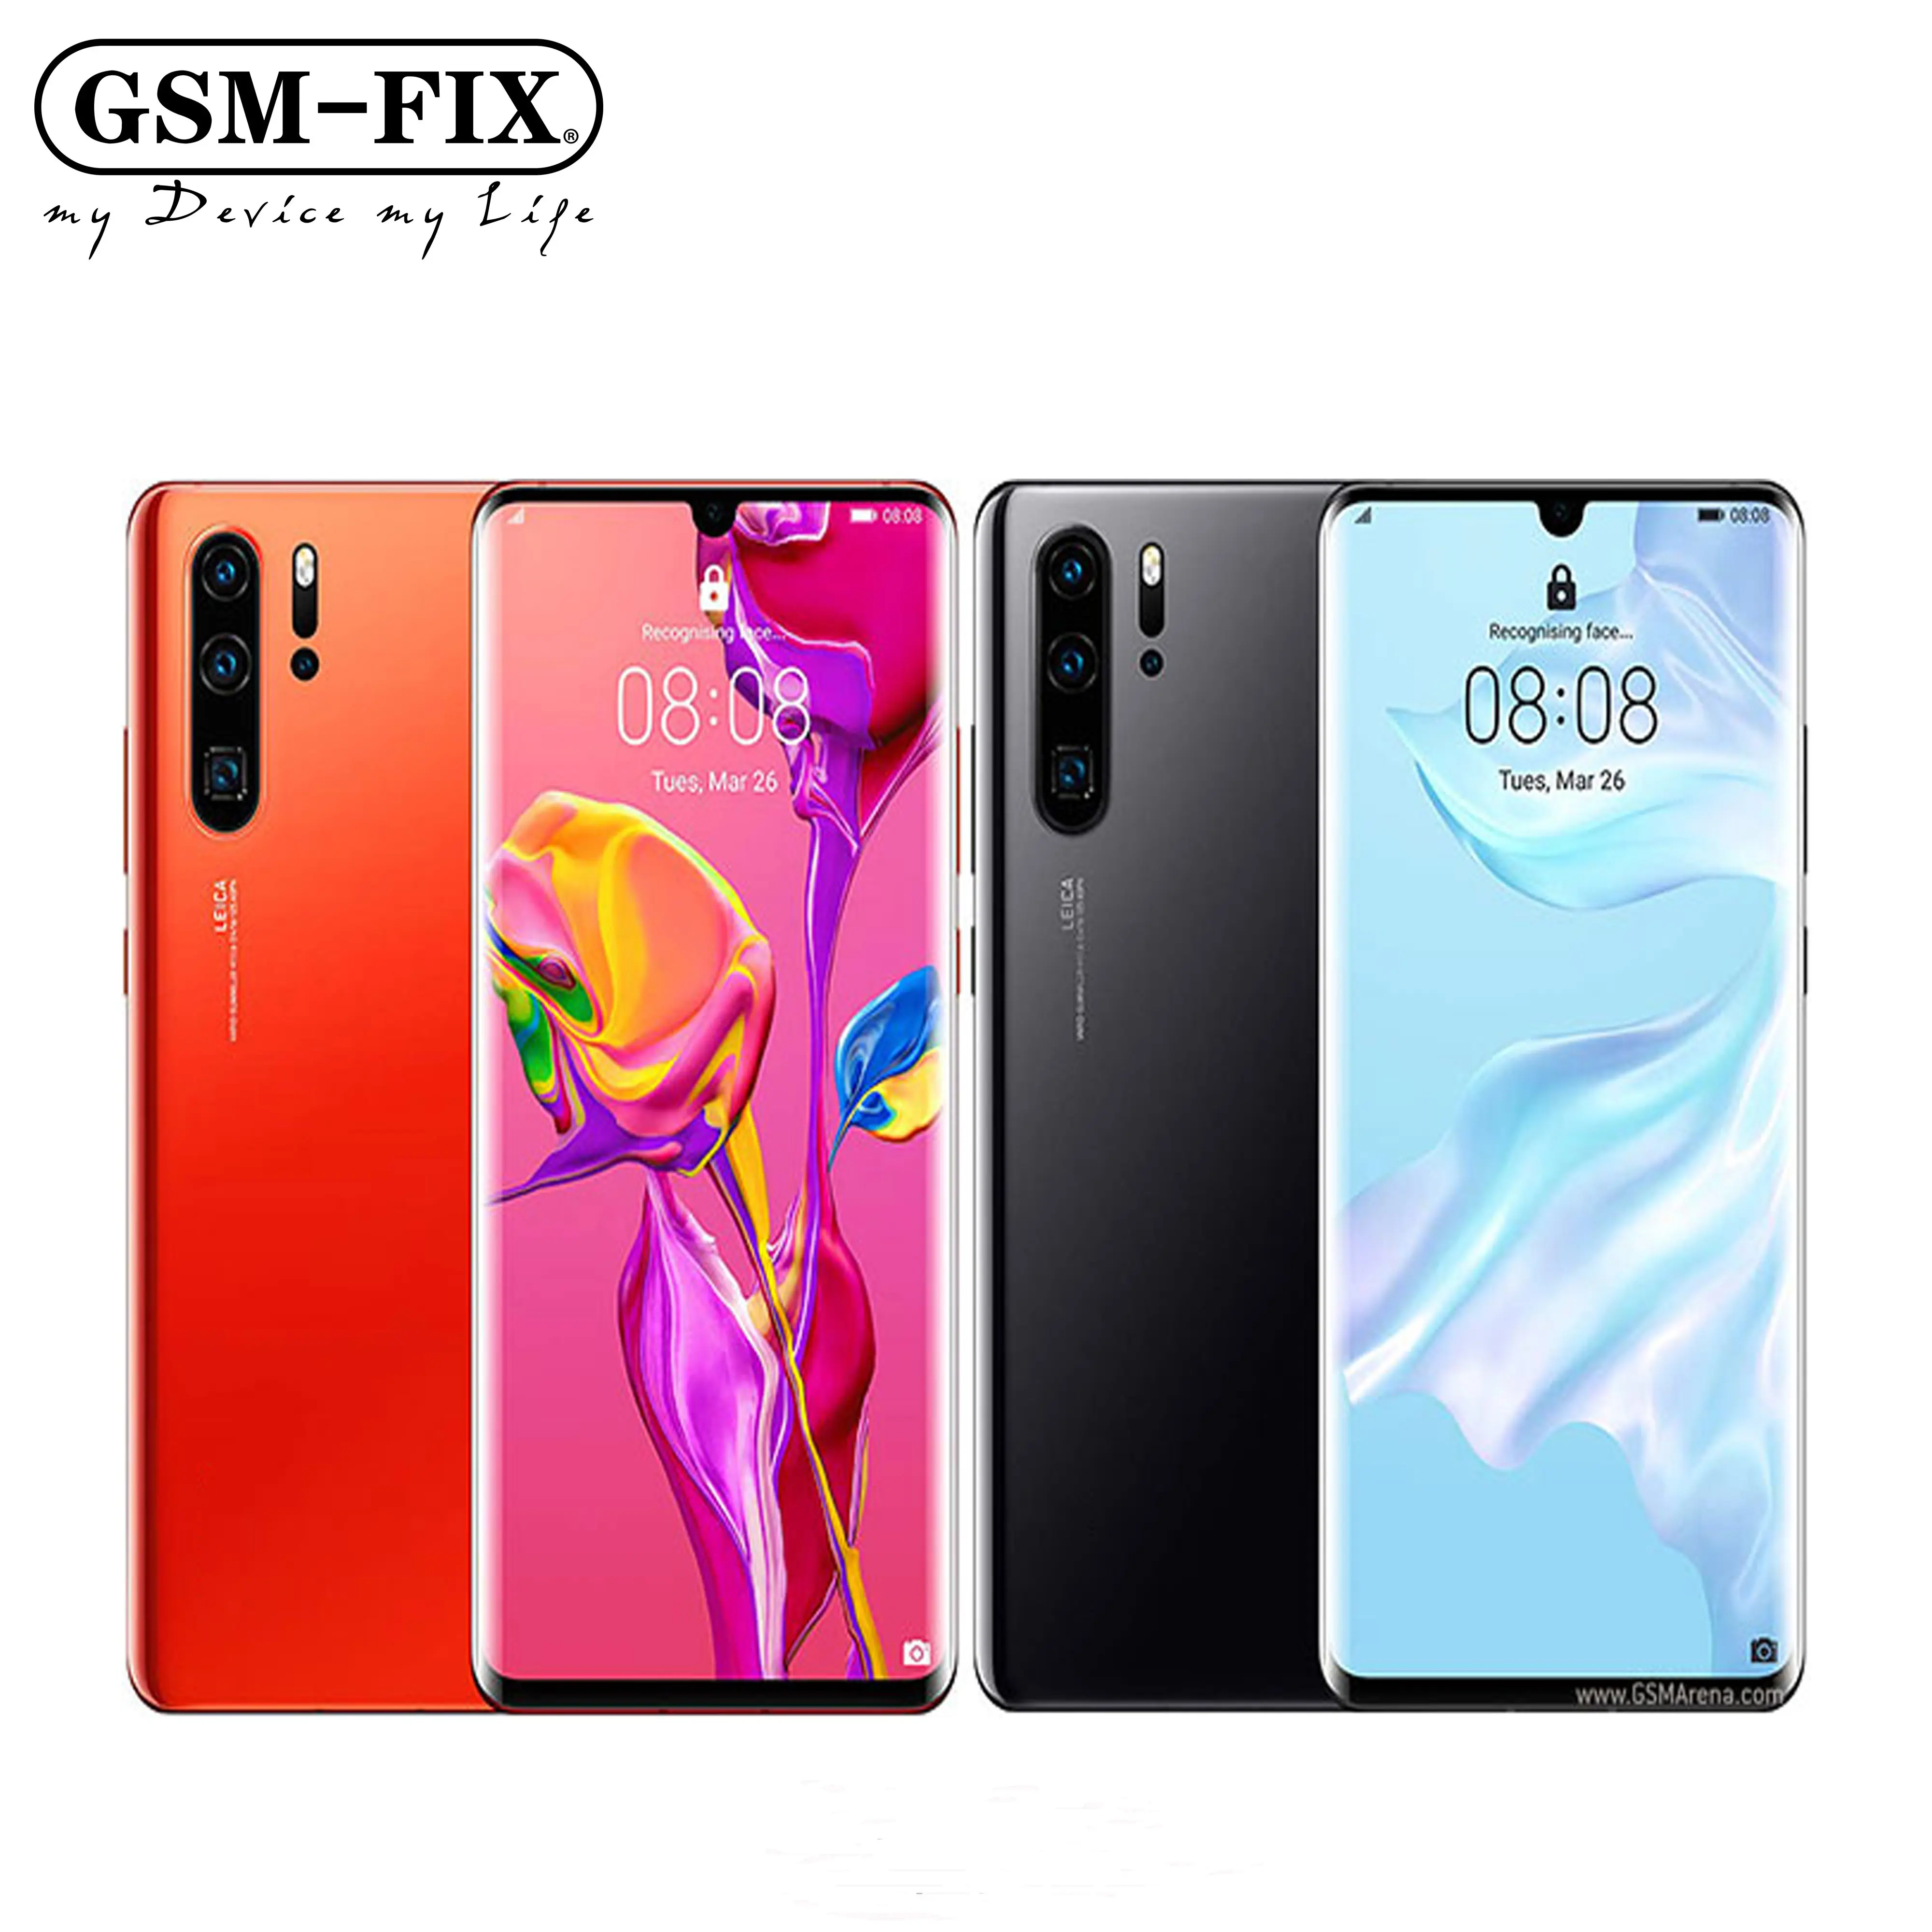 GSM-FIX Original For Huawei P30 Pro Smartphone Android 6.47 inch 128/256/512GB ROM 40MP+32MP Camera Mobile phones For Huawei